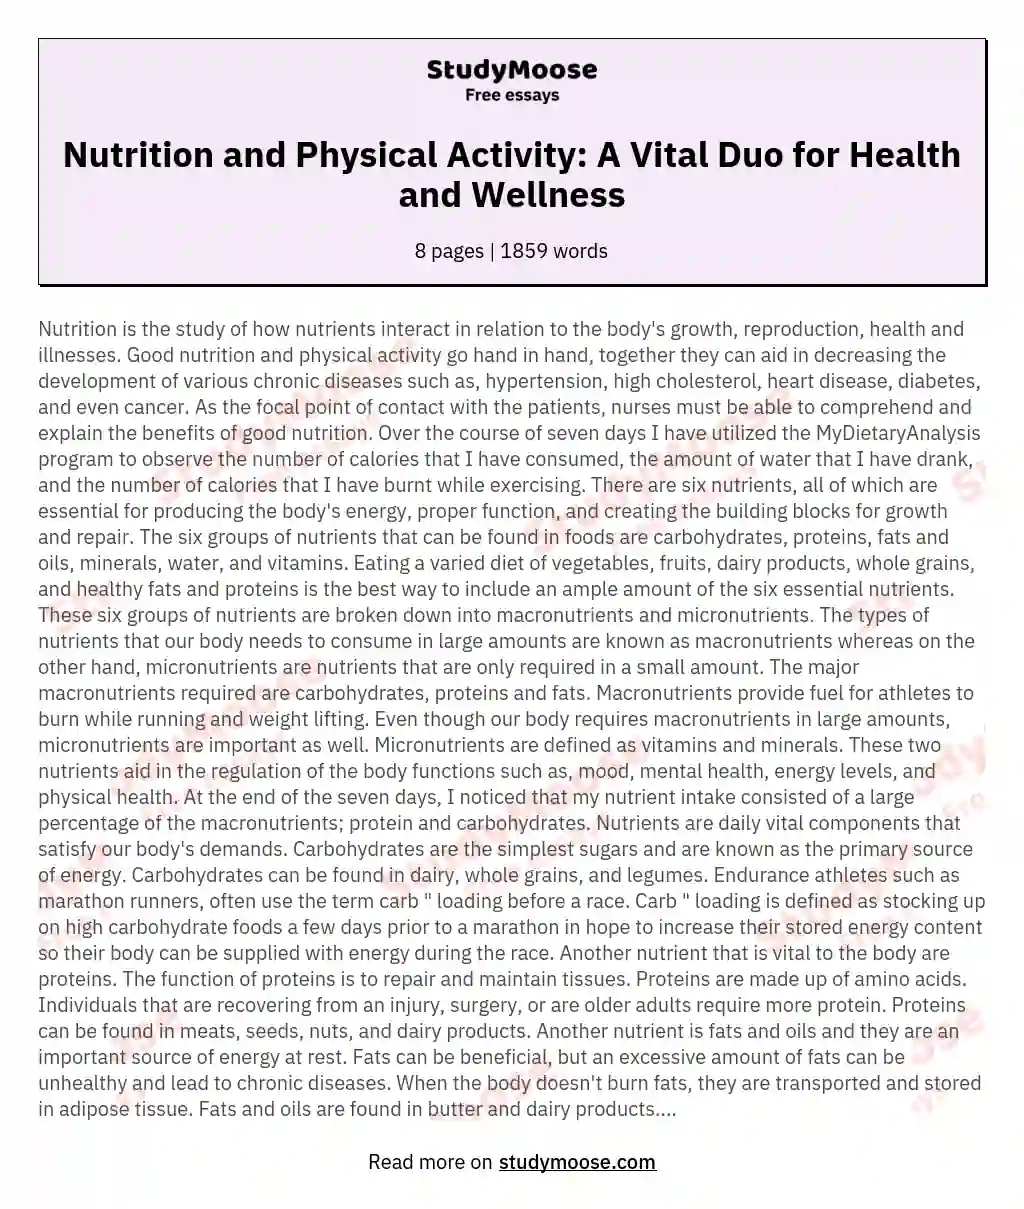 Nutrition and Physical Activity: A Vital Duo for Health and Wellness essay